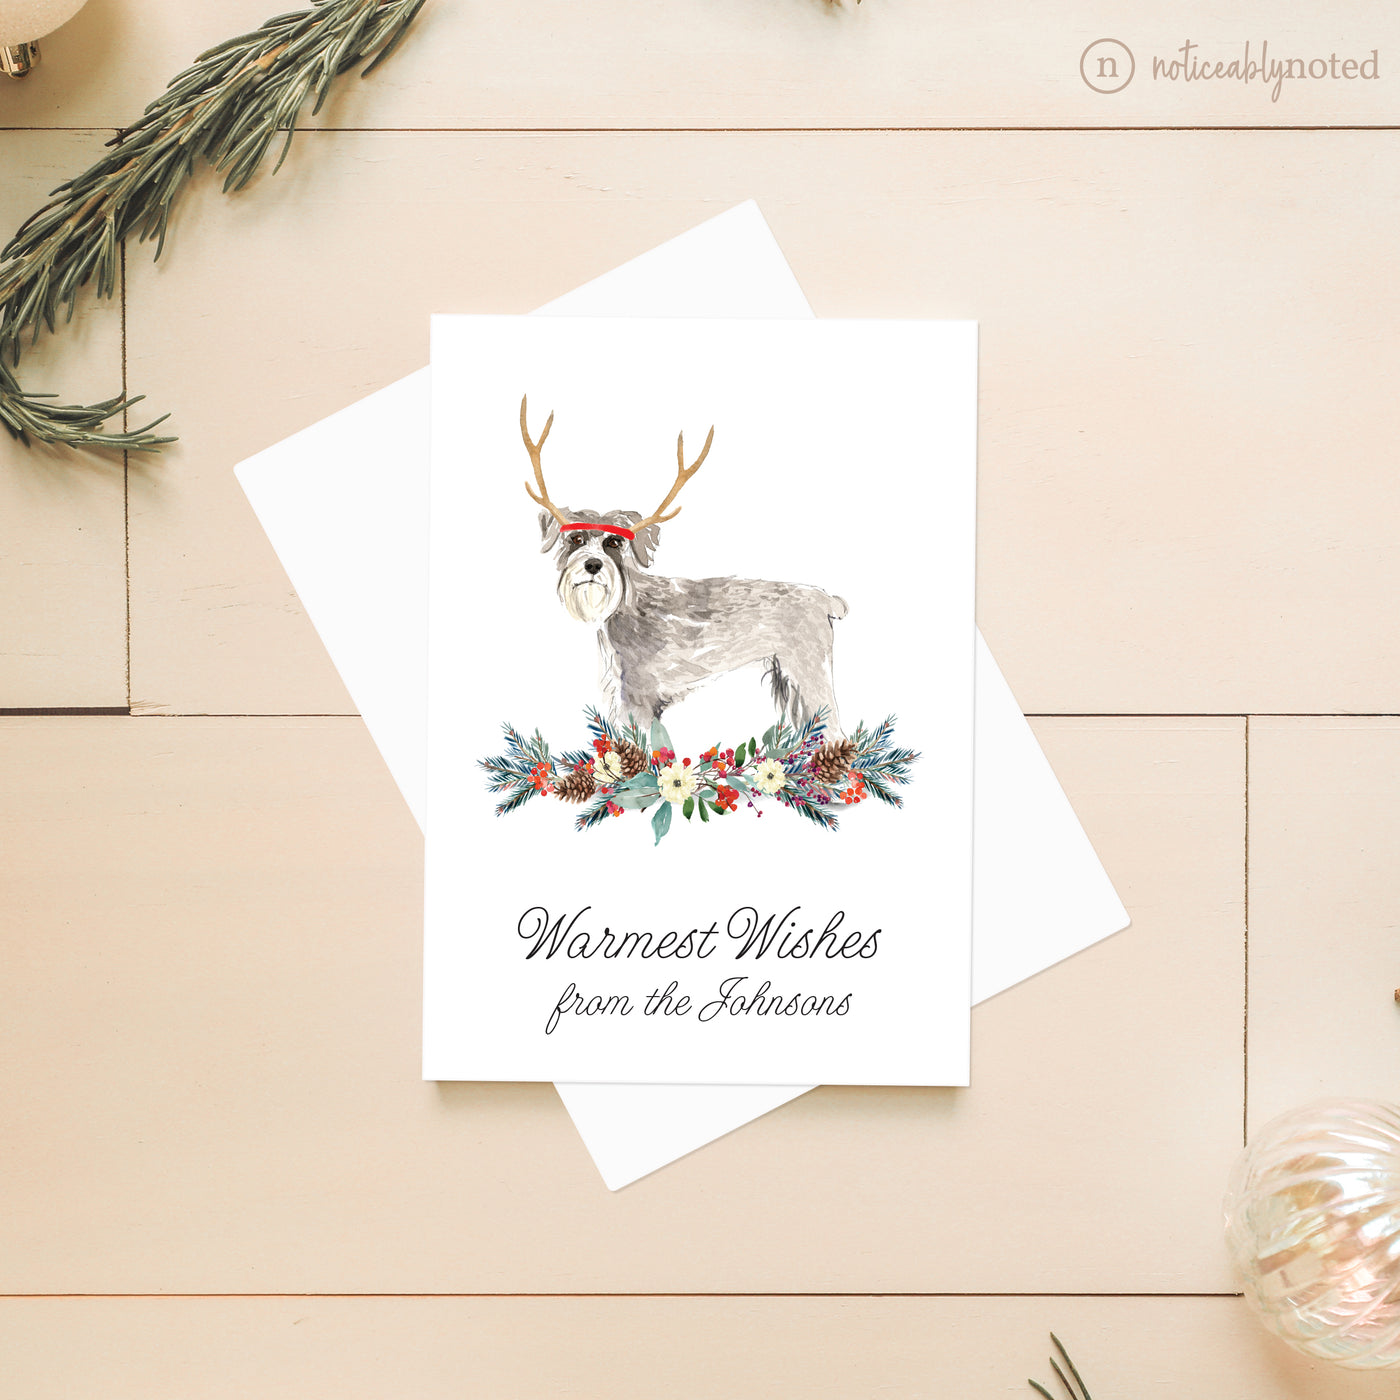 Schnauzer Dog Christmas Cards | Noticeably Noted